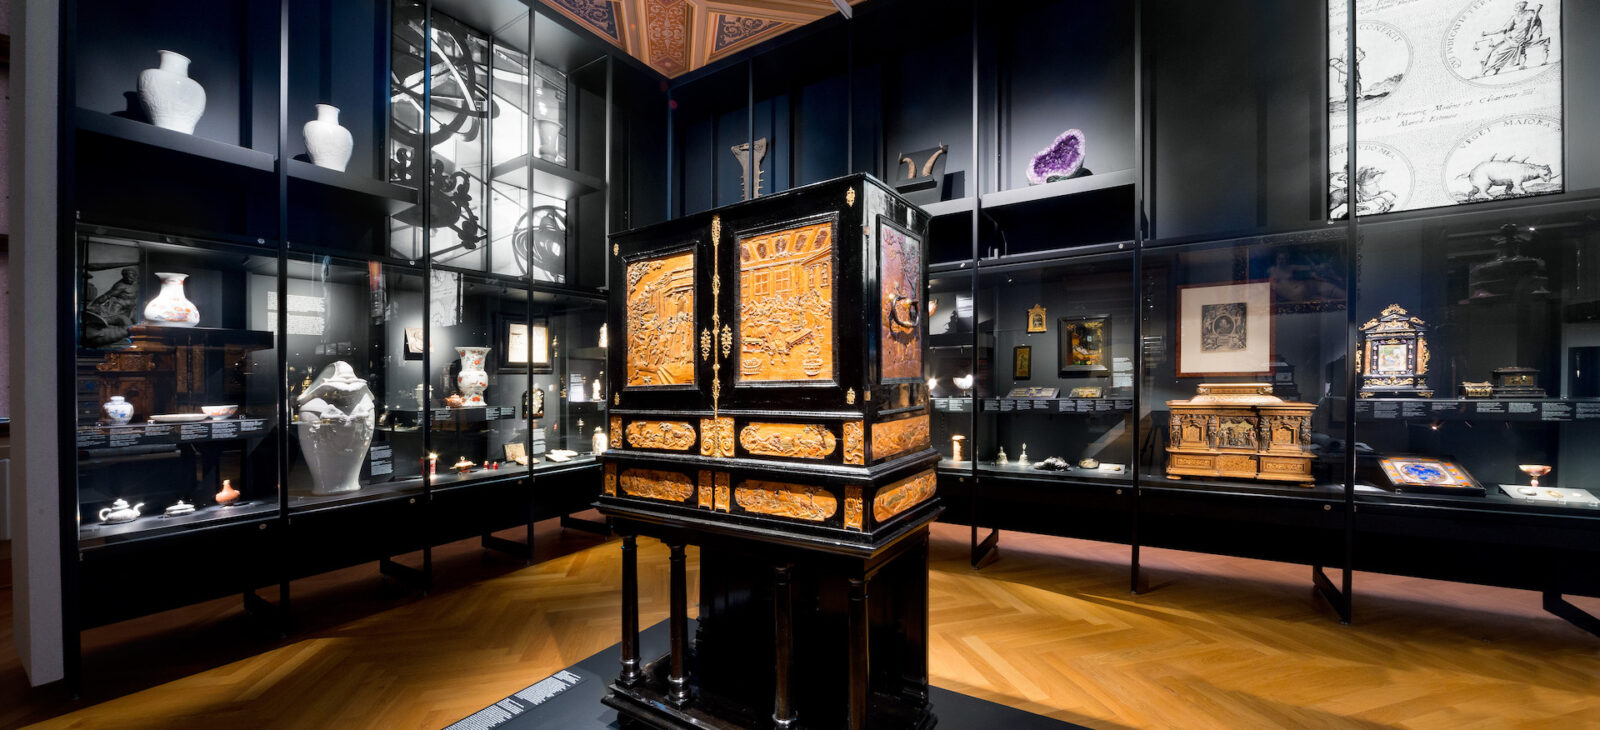 Home | The Museum of Decorative Arts in Prague